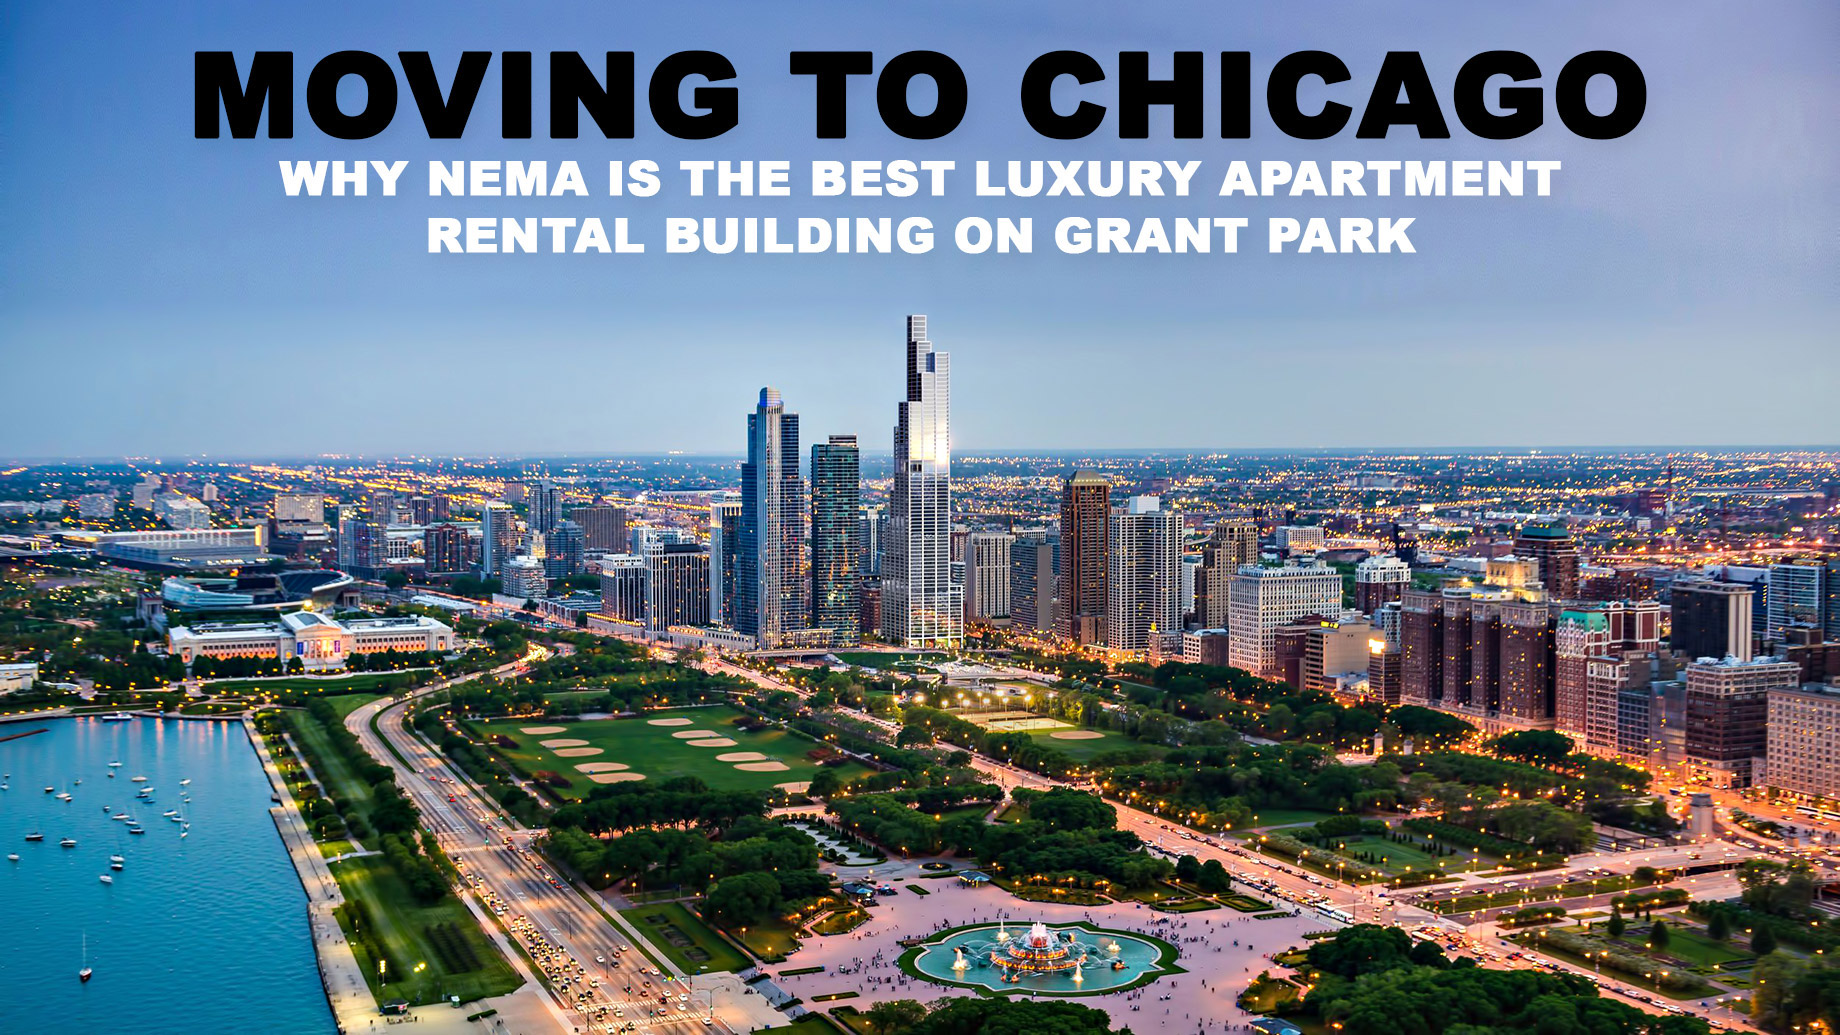 Moving to Chicago - Why NEMA is the Best Luxury Apartment Rental Building on Grant Park